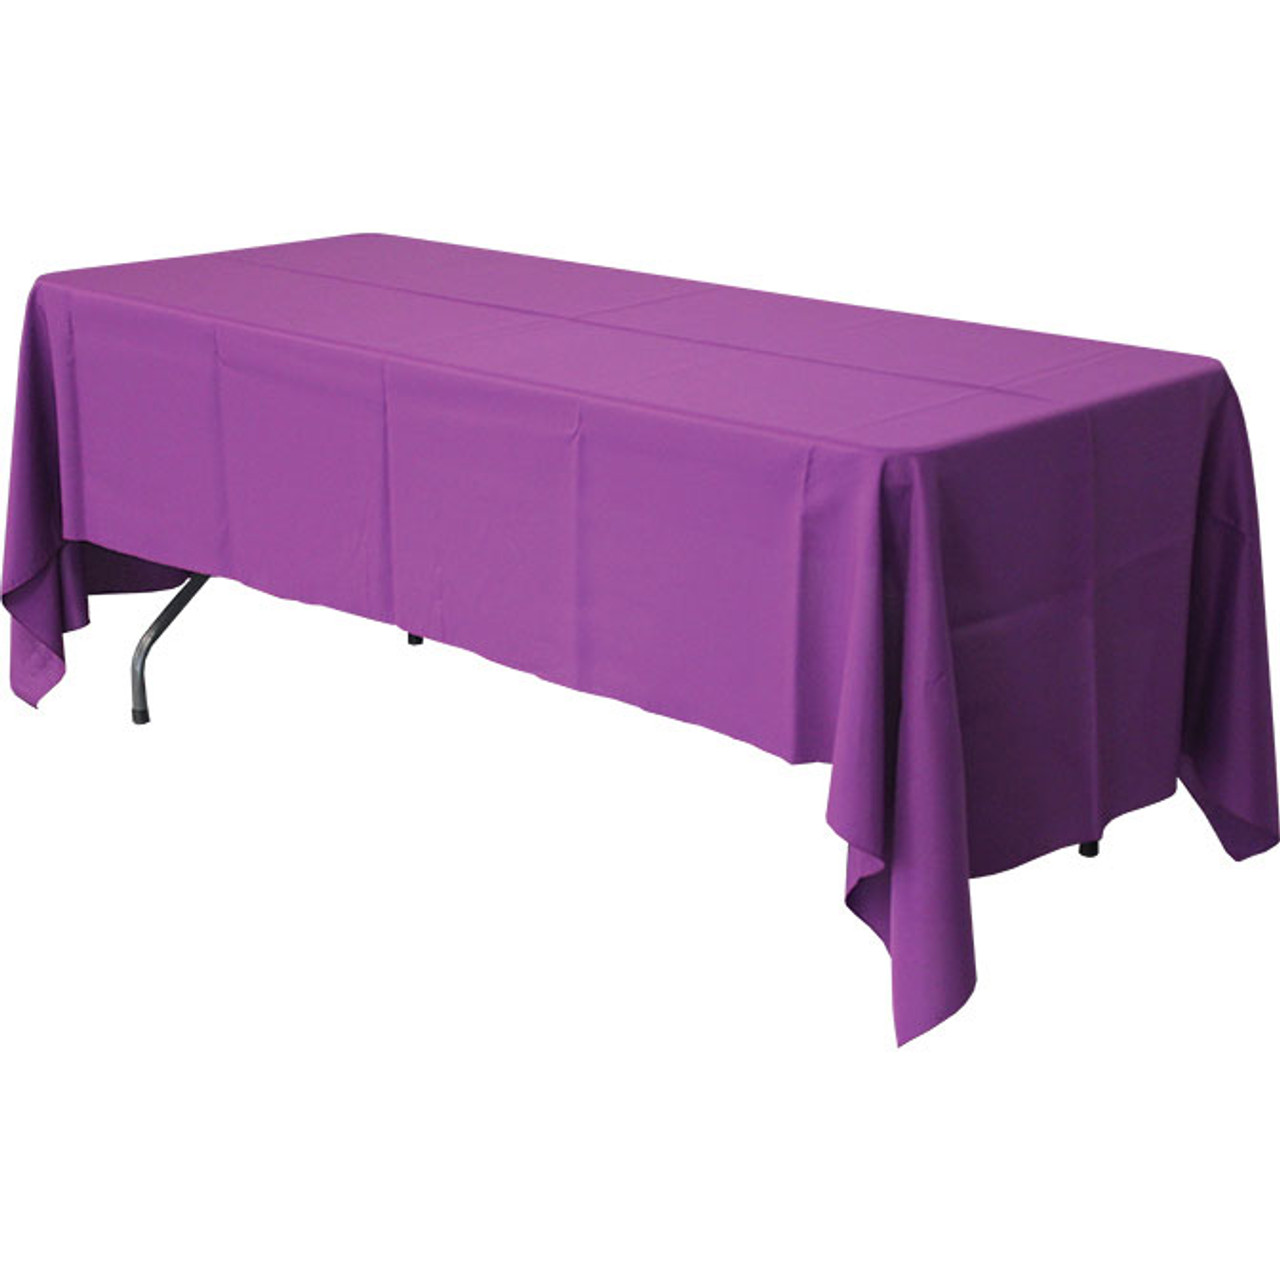 60" x 120" Polyester Tablecloth